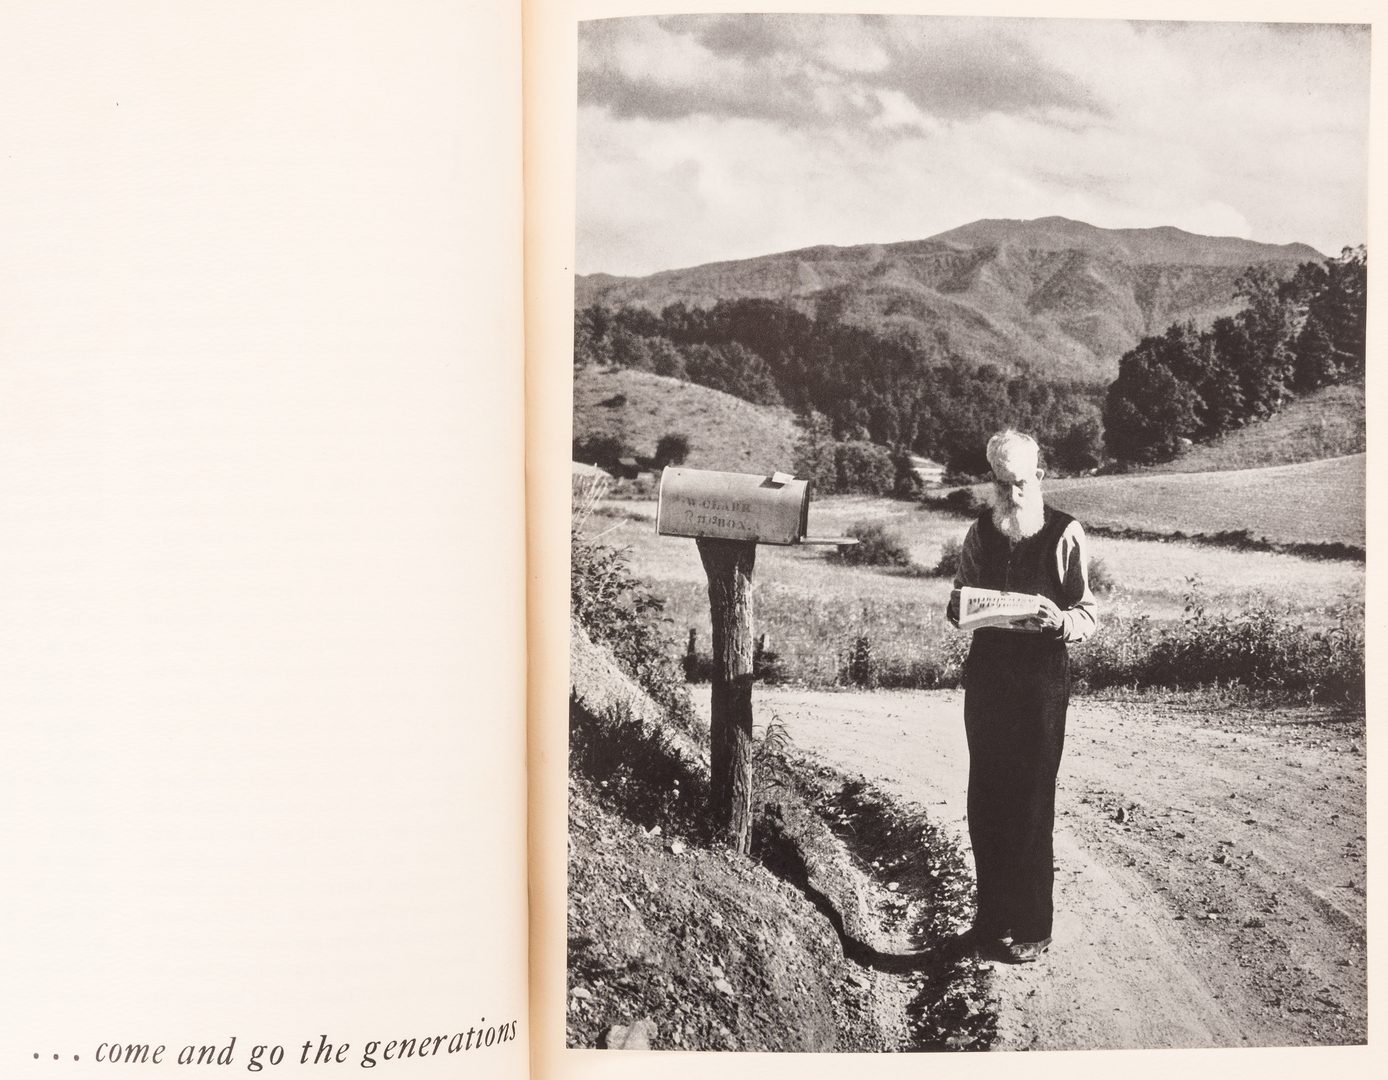 Lot 547: Valhalla in the Smokies, Maxwell/ Exline, 1938